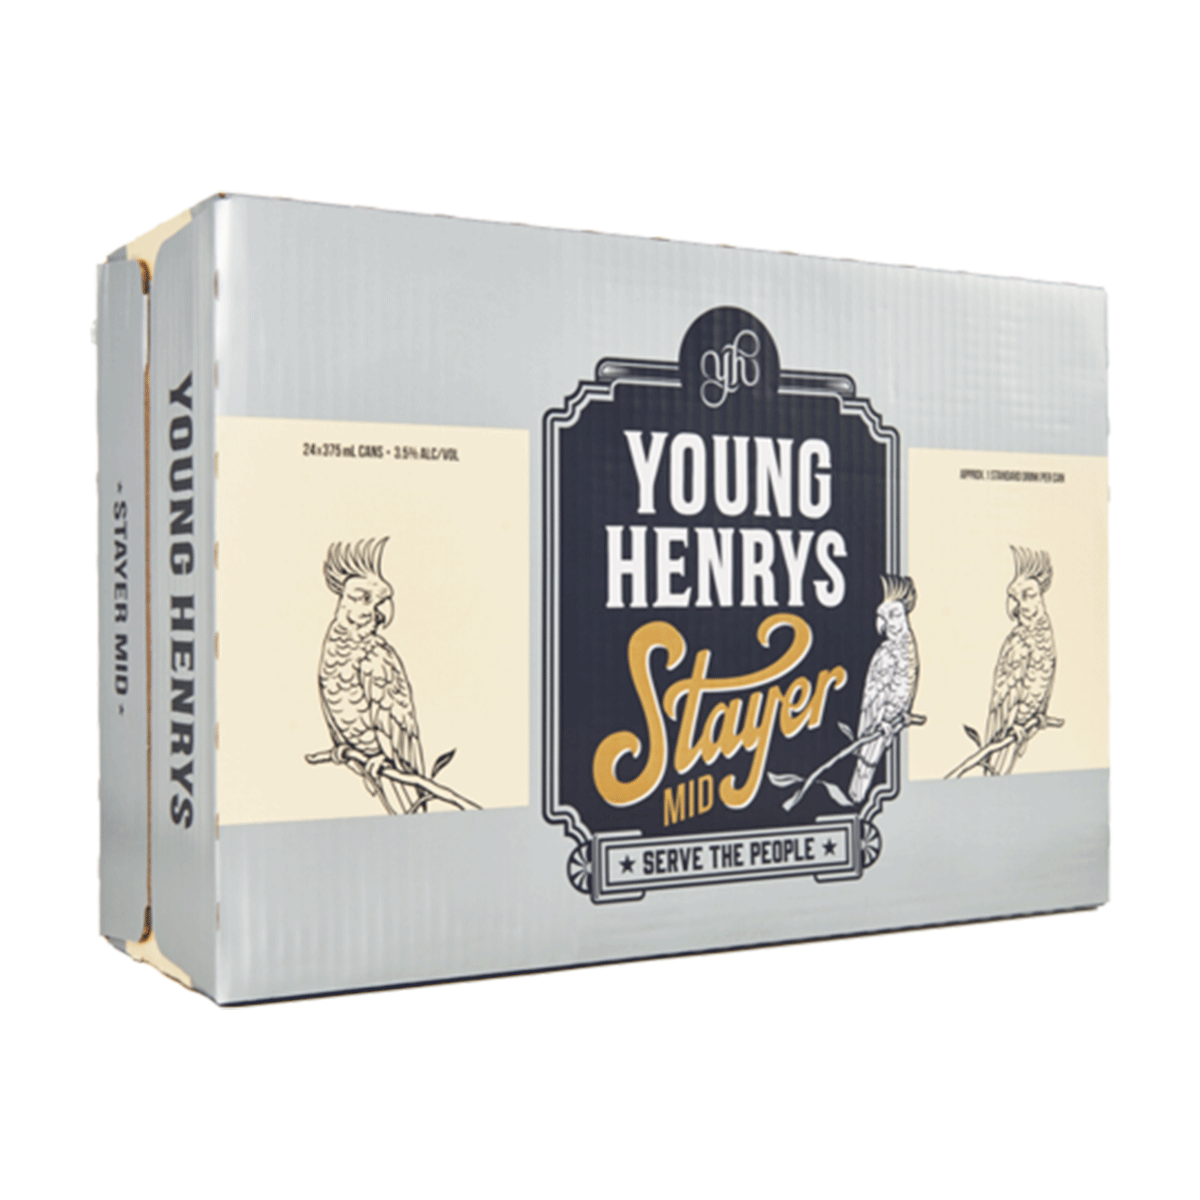 Young Henrys The Stayer Mid-Strength Cans